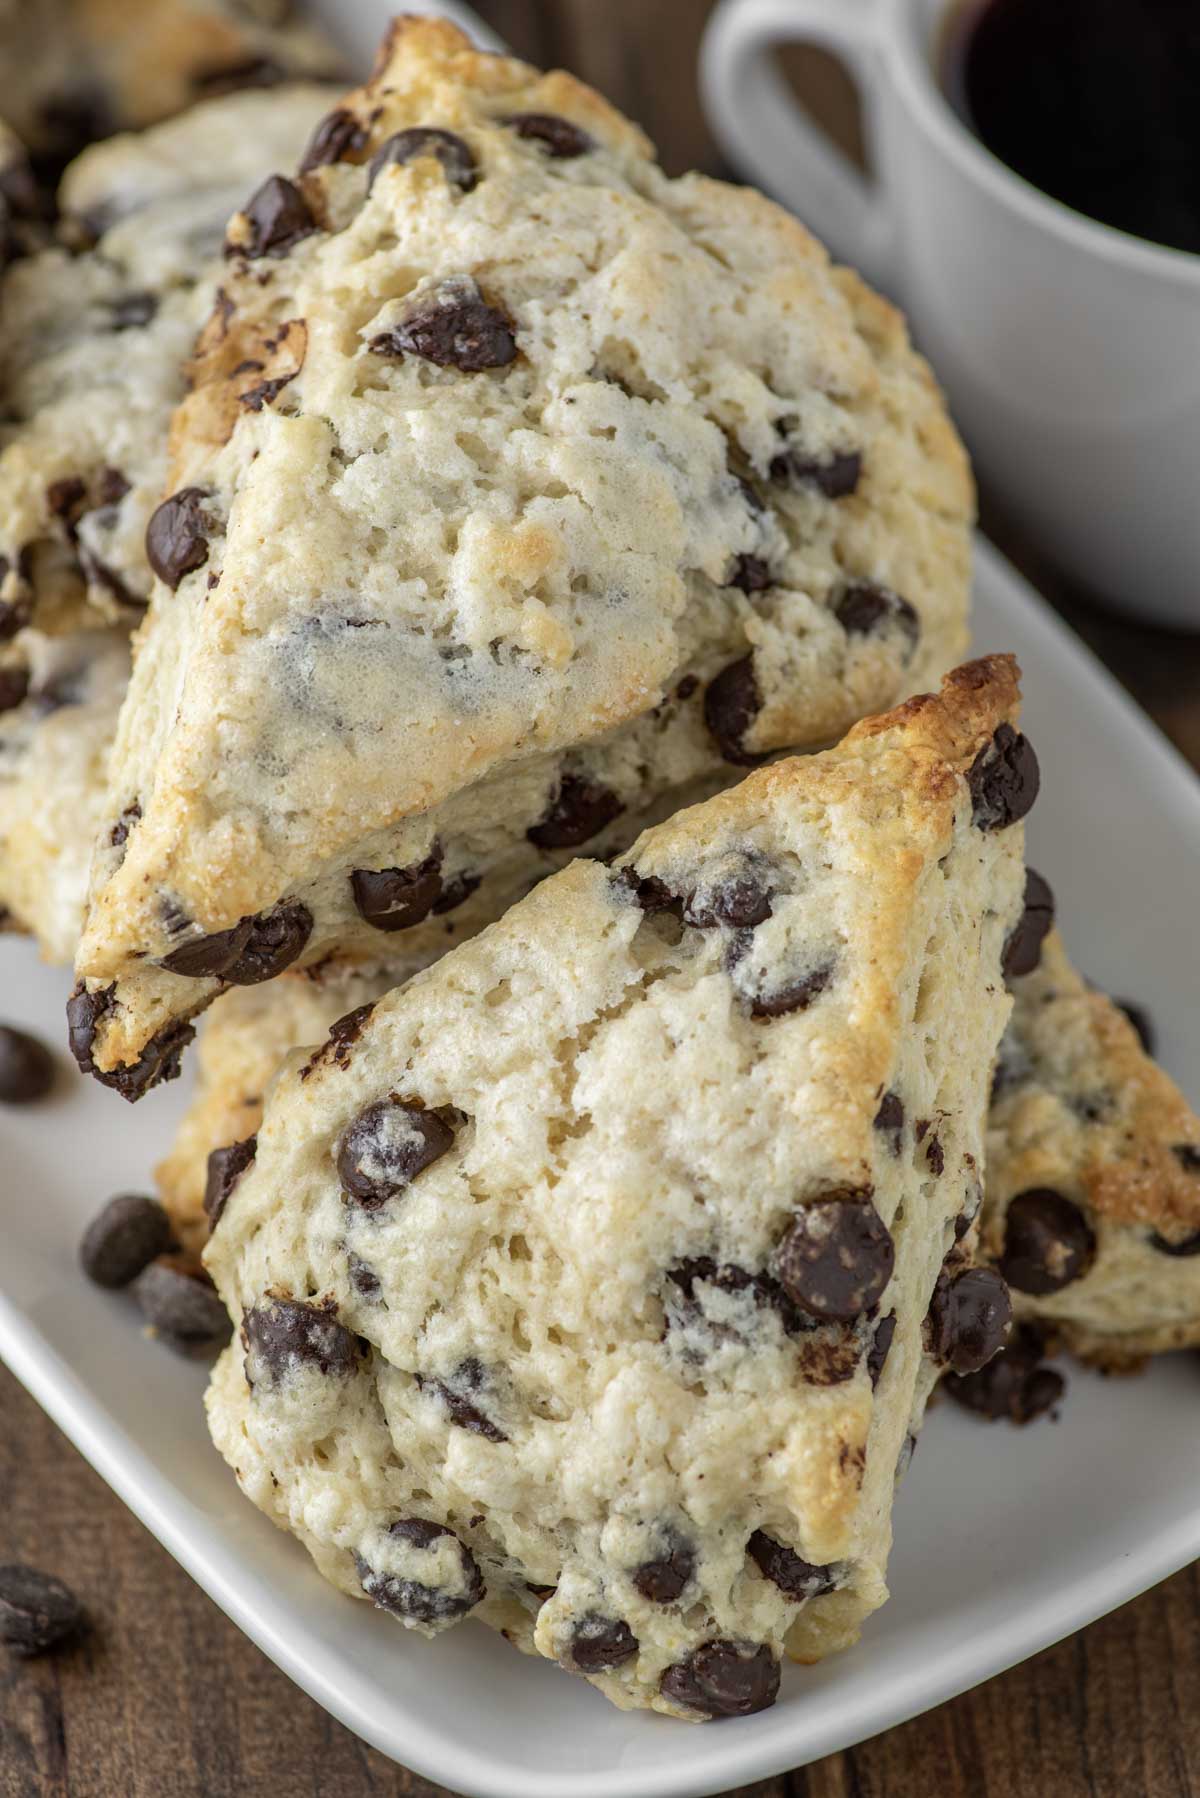 An image of chocolate chip scones.